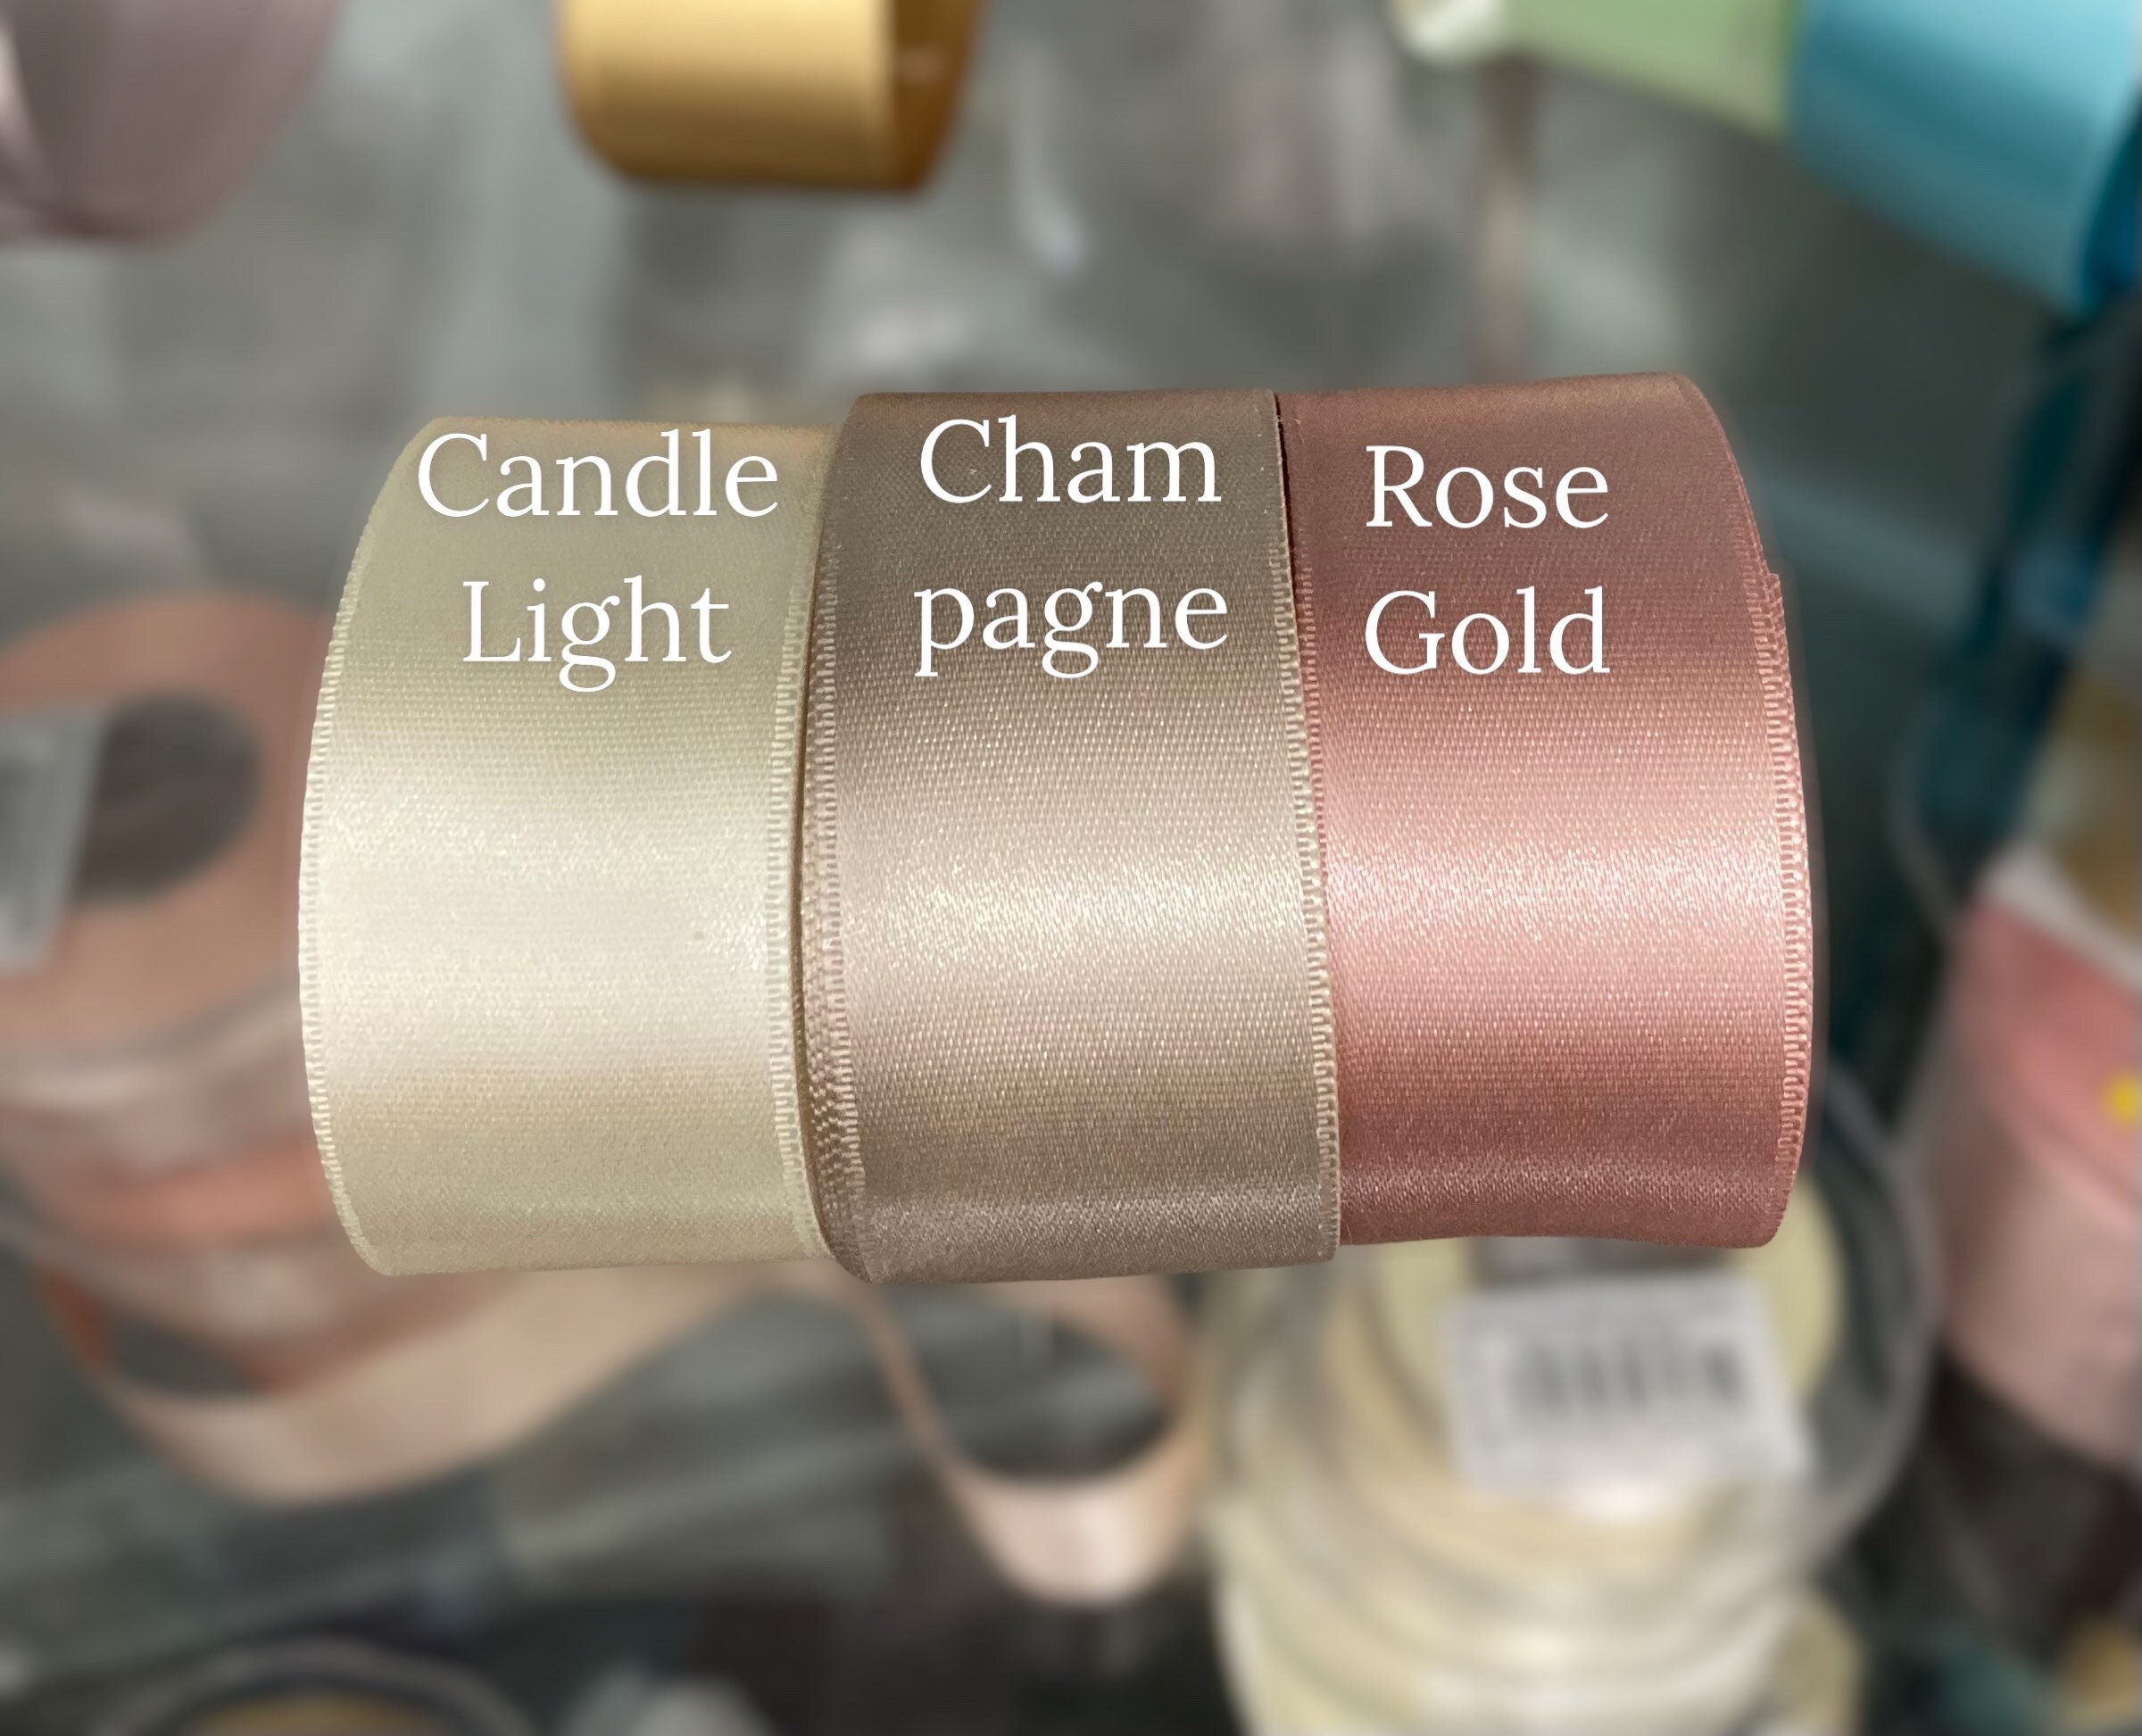 Champagne Satin Ribbon Double Sided Luxurious Satin High 